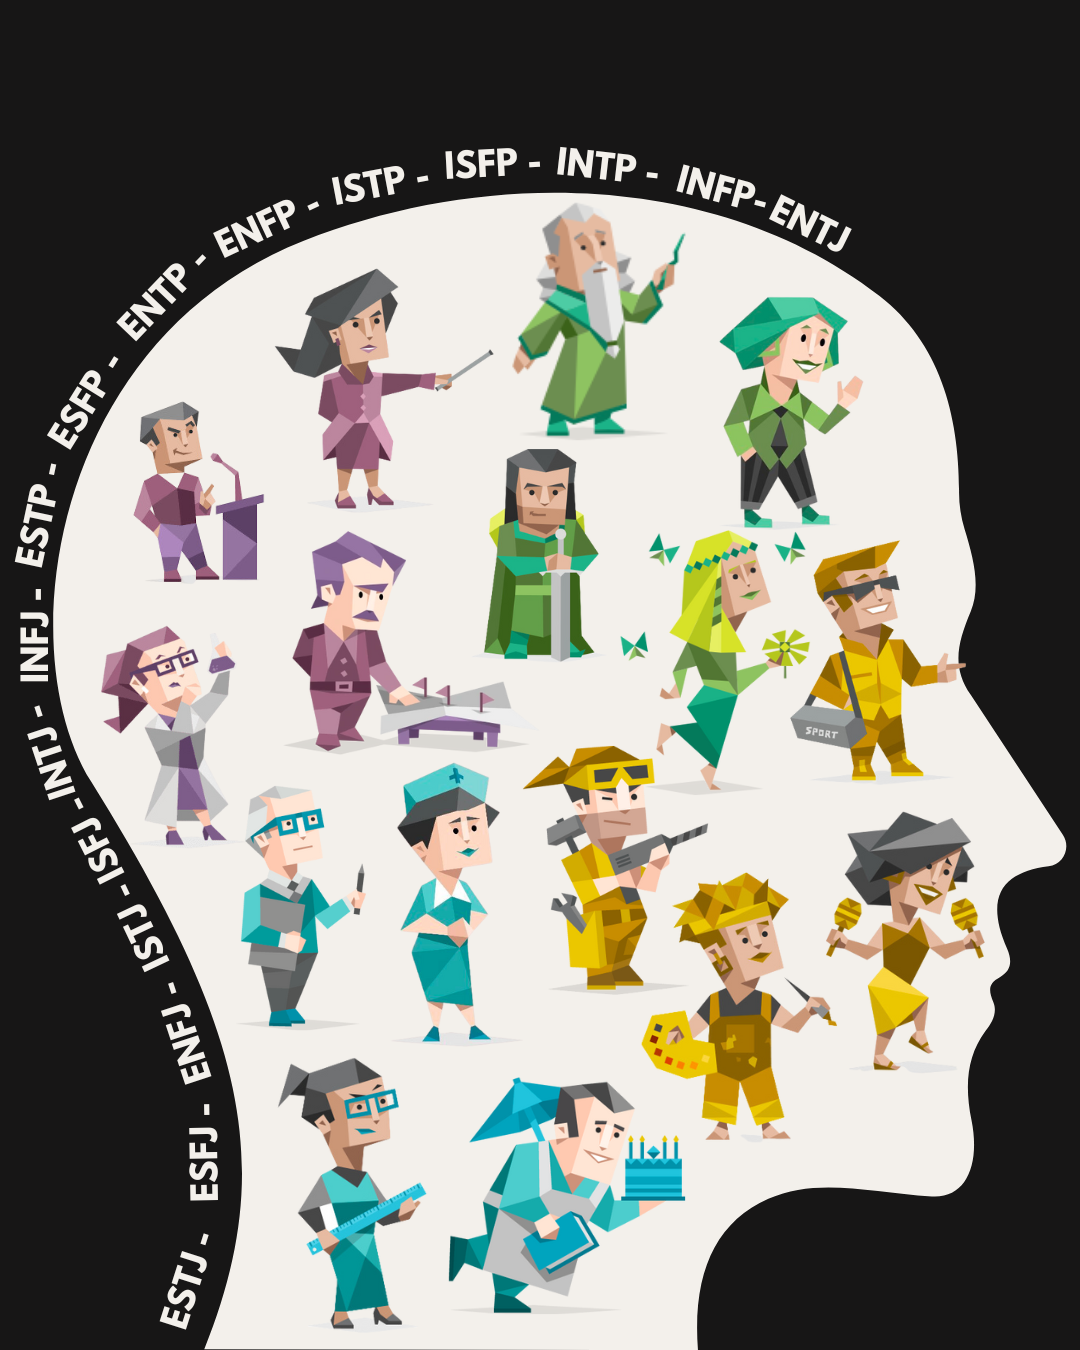 Learn about the MBTI 16 personality types